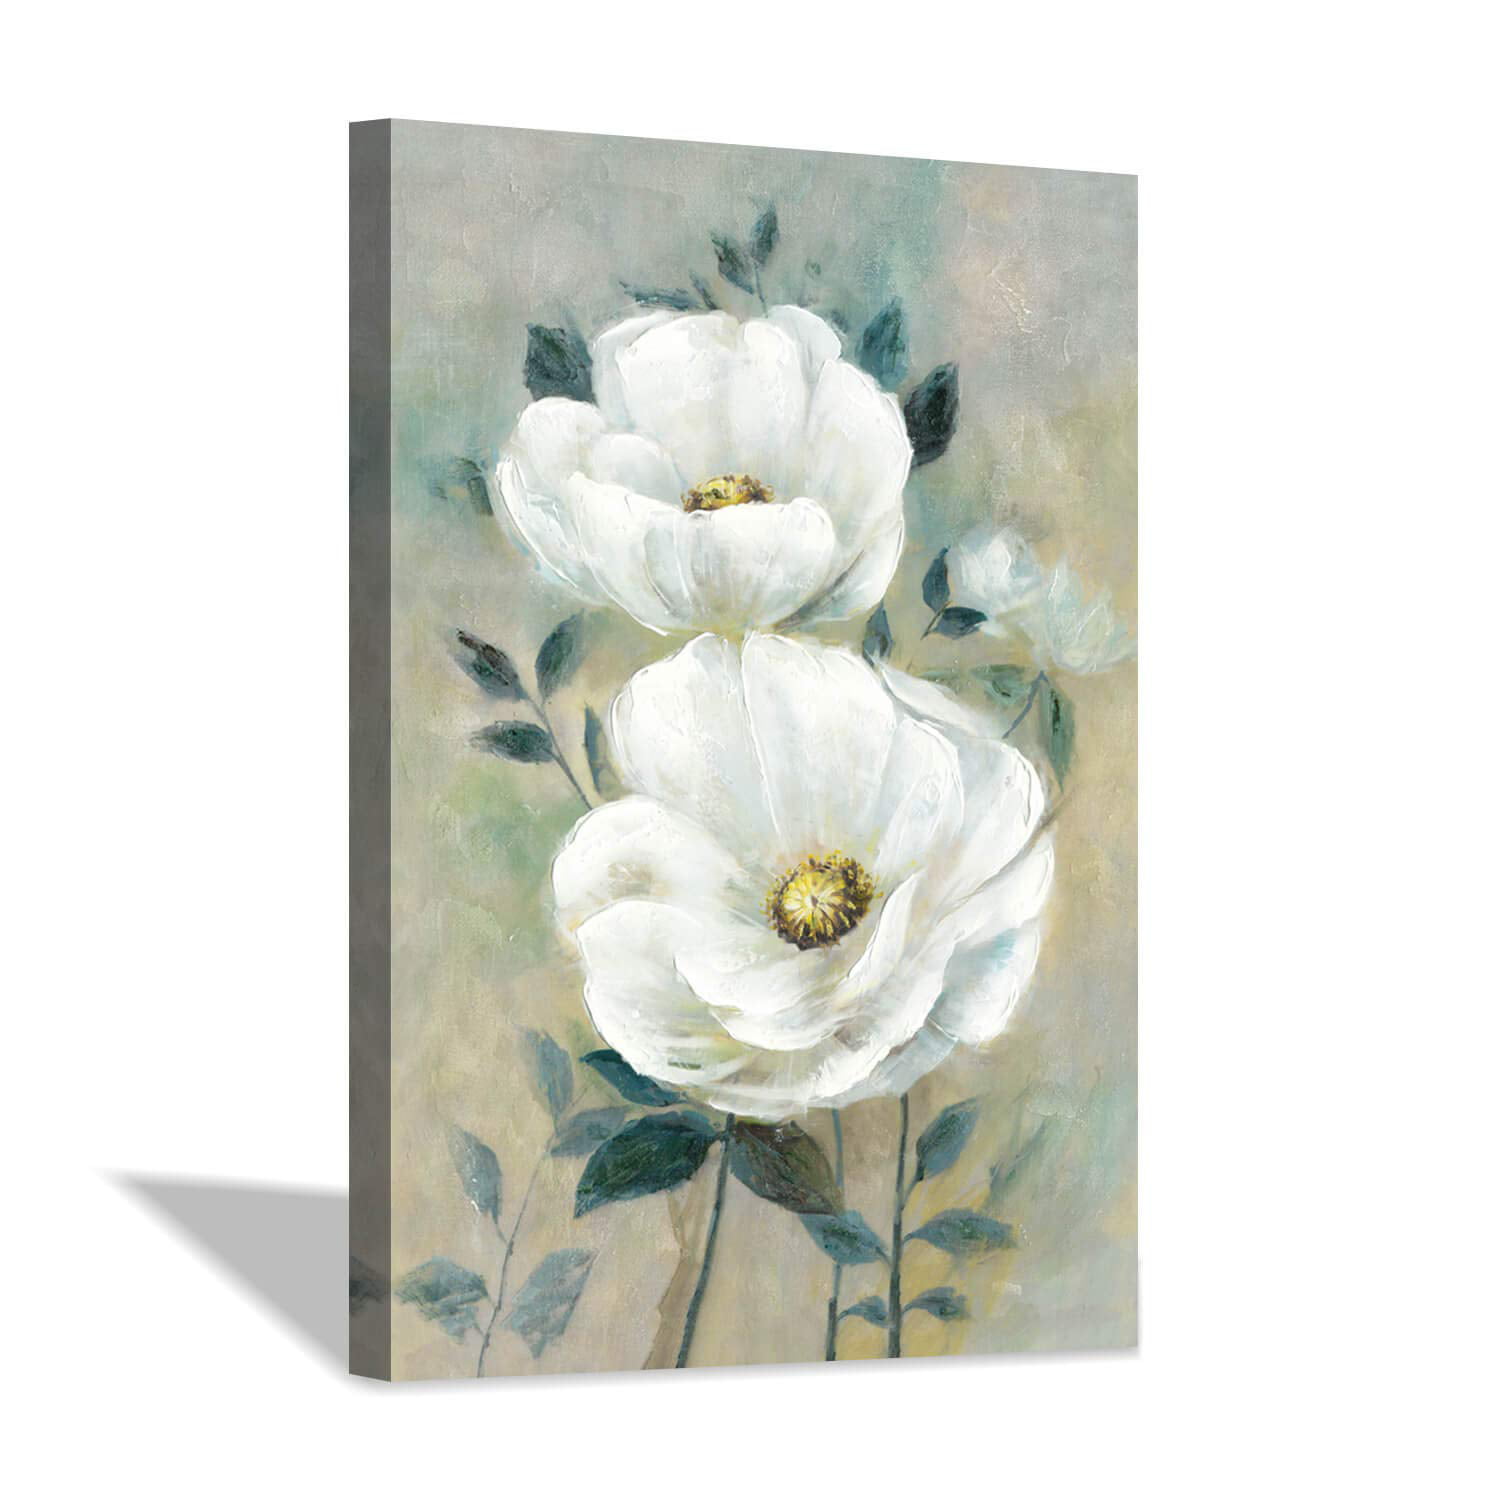 LIVEDITOR Blooming White Flowers Wall Art Print Painting Floral Picture ...